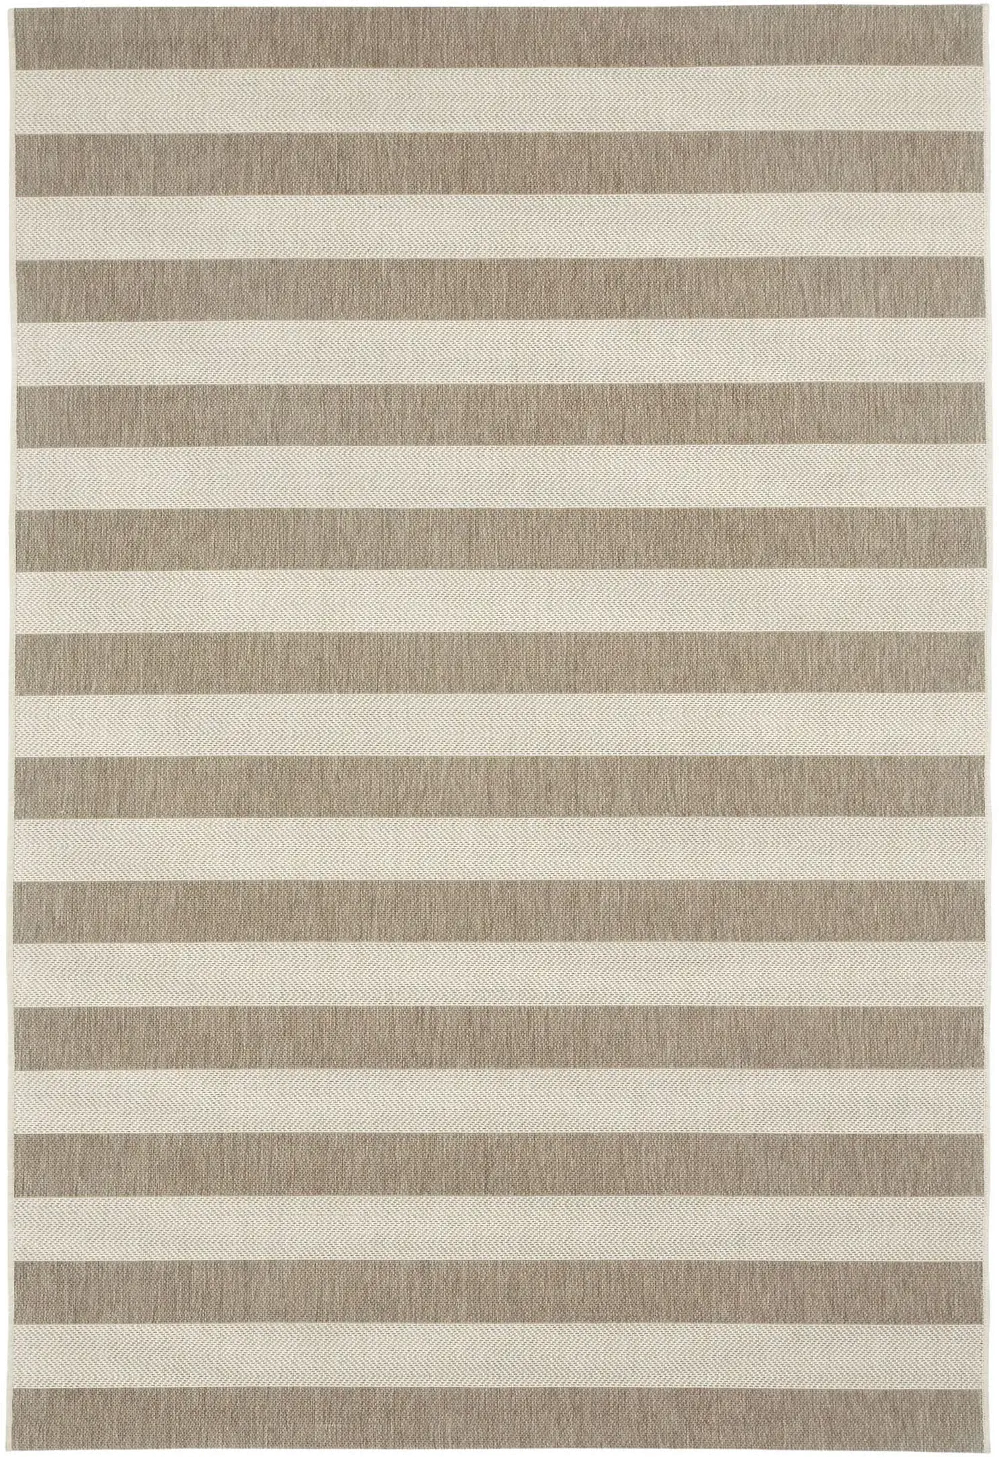 4730675811 8 x 11 Large Striped Barley Tan Indoor-Outdoor Rug - Finesse-1